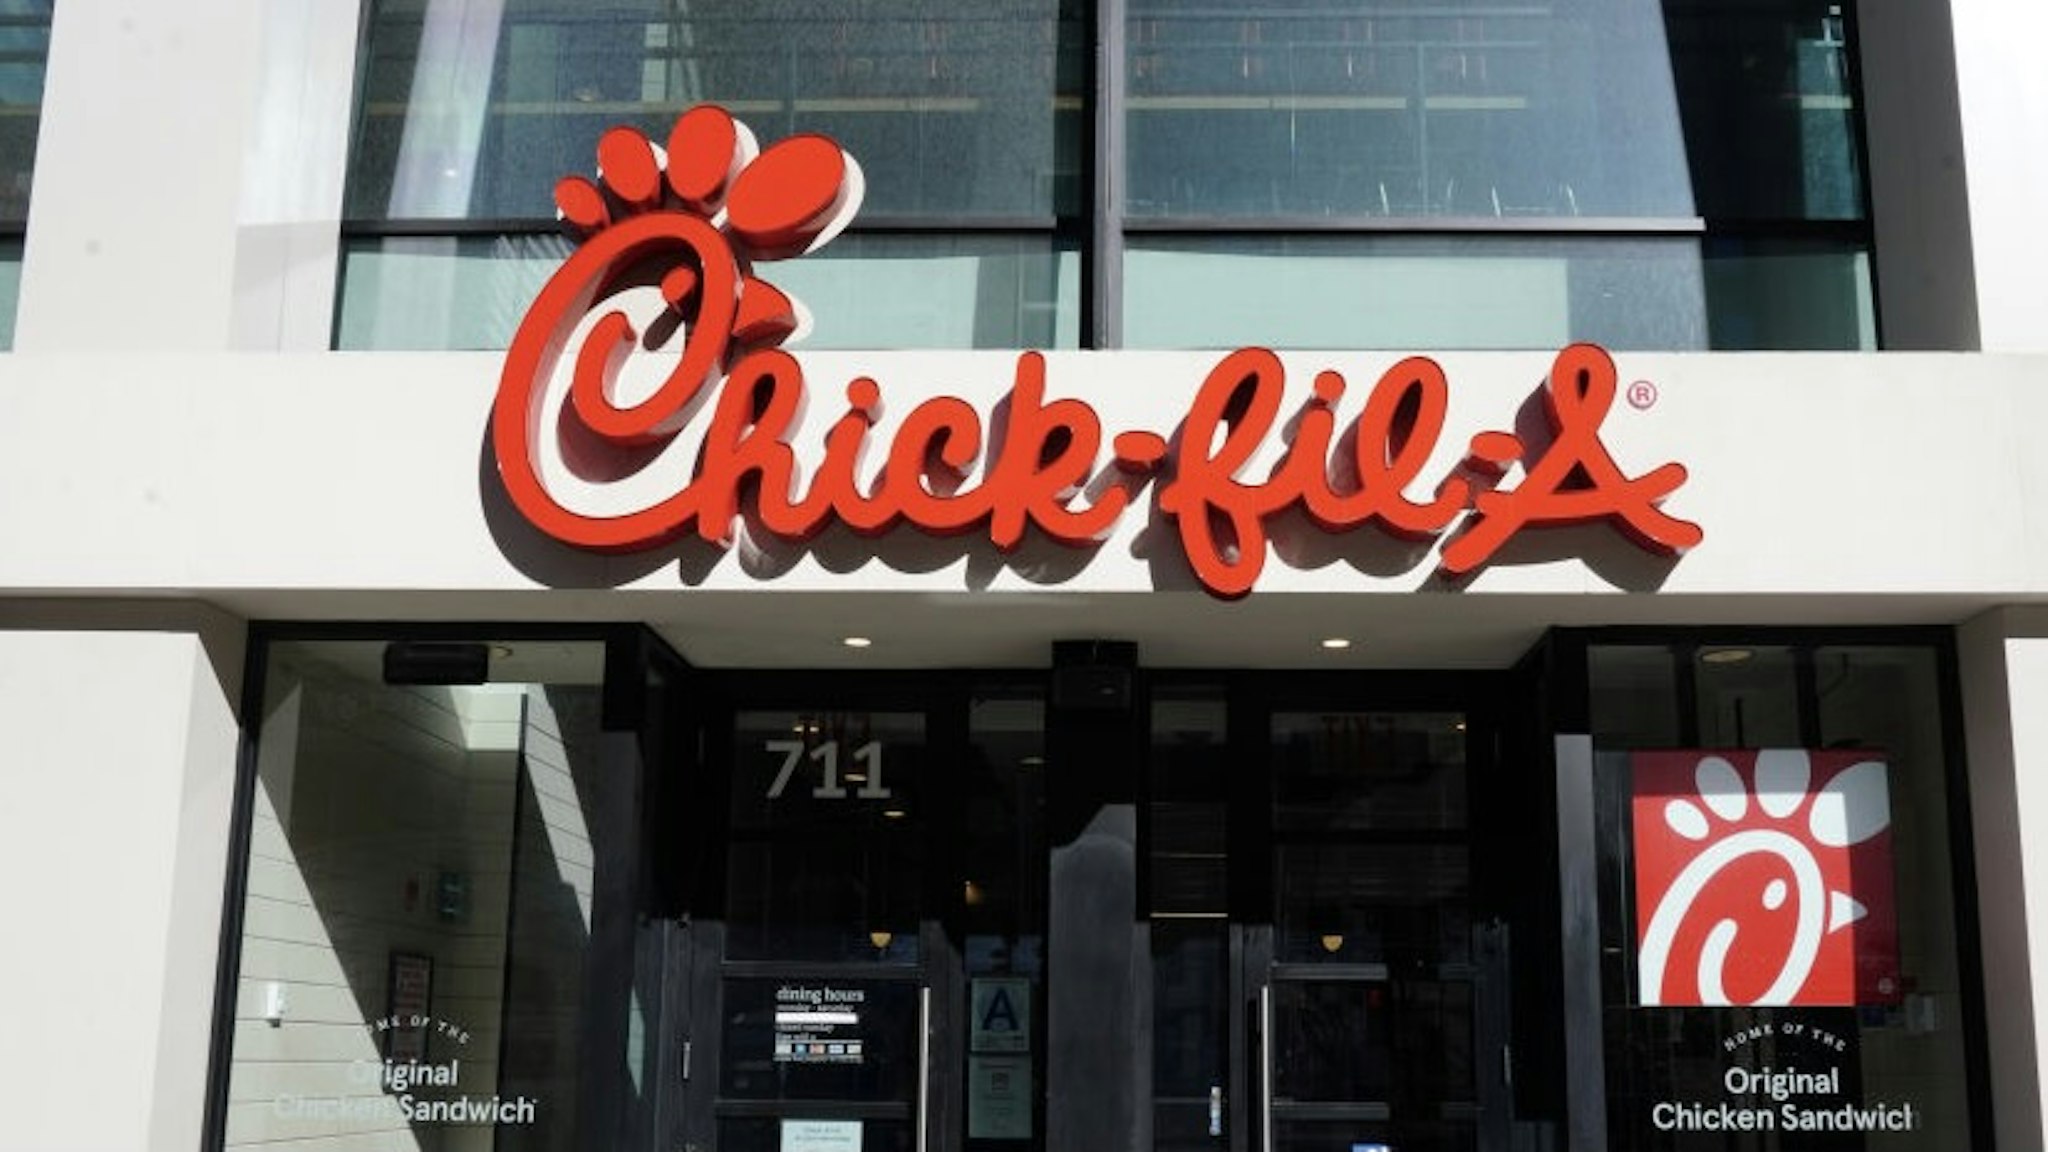 Daily Life In New York City Amid Coronavirus Outbreak NEW YORK, NEW YORK - MAY 12: An exterior view of Chick-fil-A during the coronavirus pandemic on May 12, 2020 in New York City. COVID-19 has spread to most countries around the world, claiming over 292,000 lives with over 4.3 million infections reported. (Photo by Cindy Ord/Getty Images) Cindy Ord / Staff via Getty Images